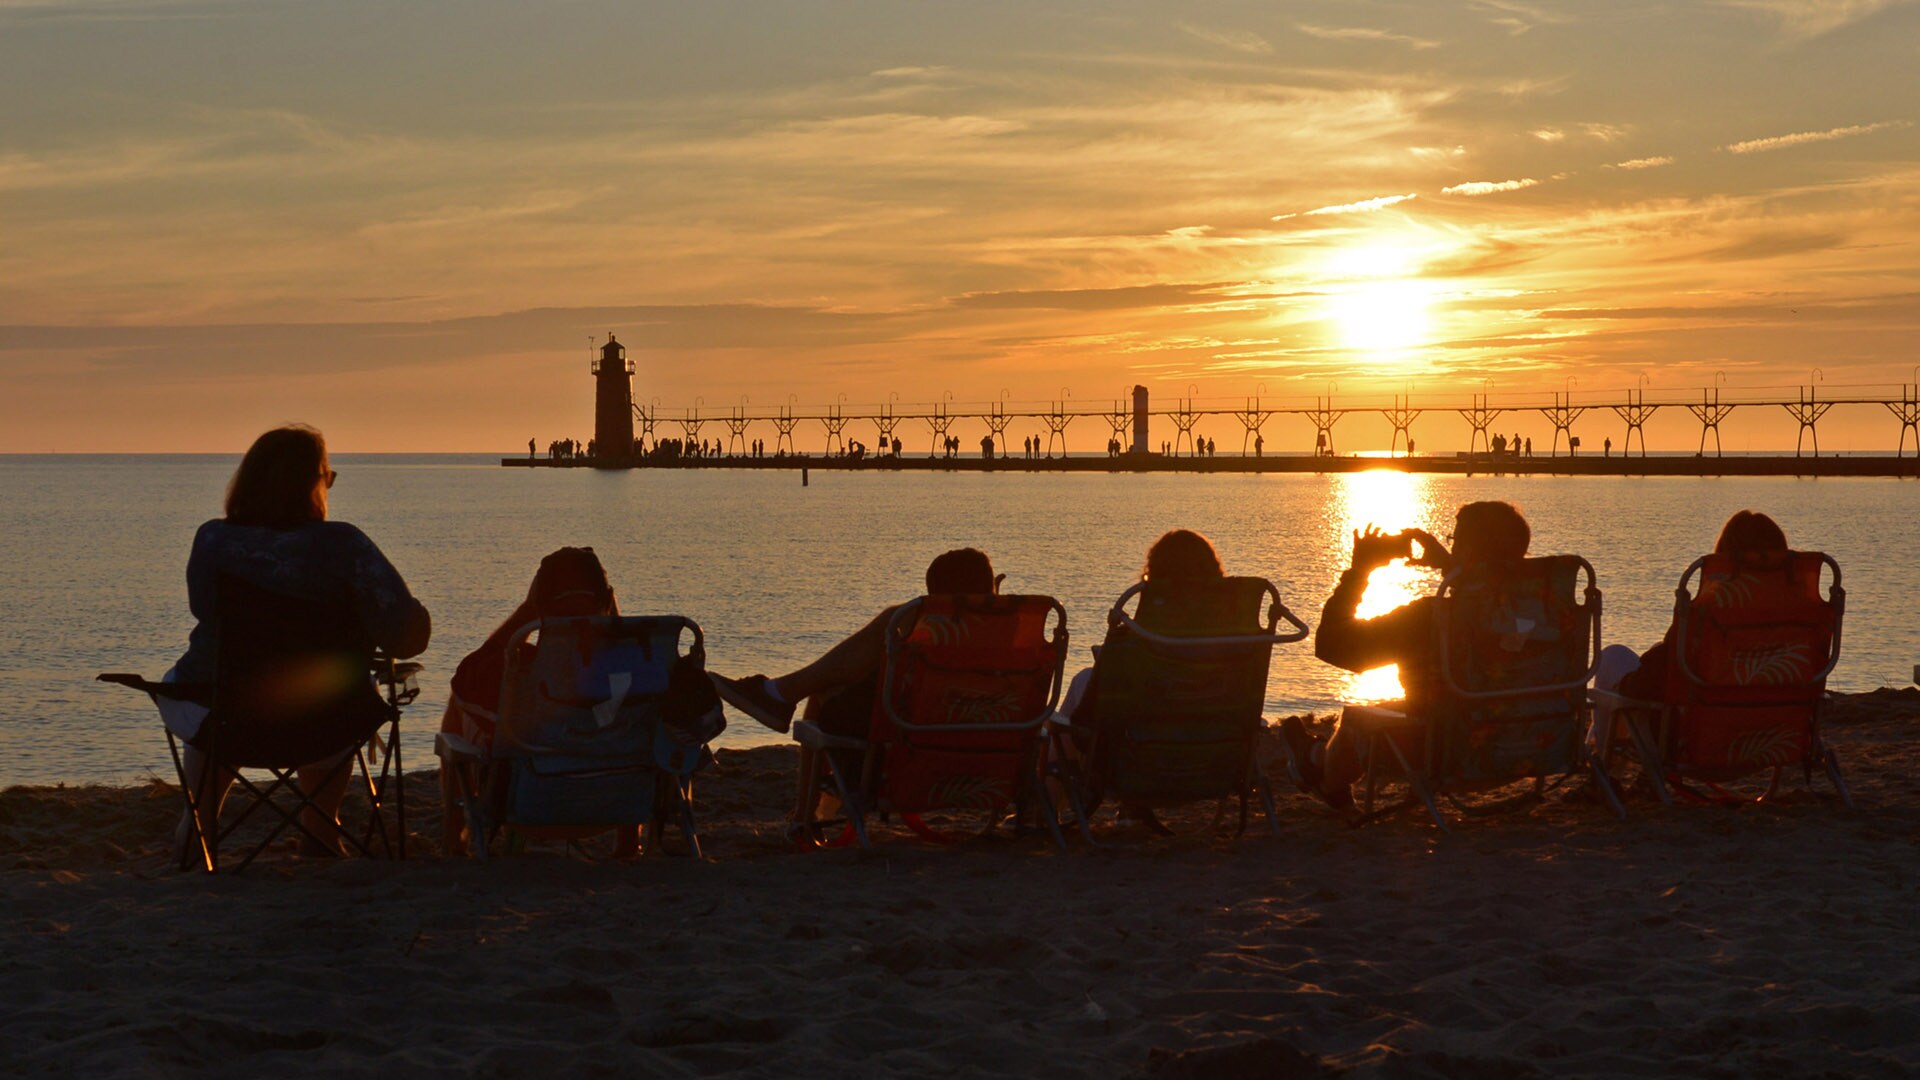 People watch the sun set near the historic lighthouse in South Haven, Michigan.